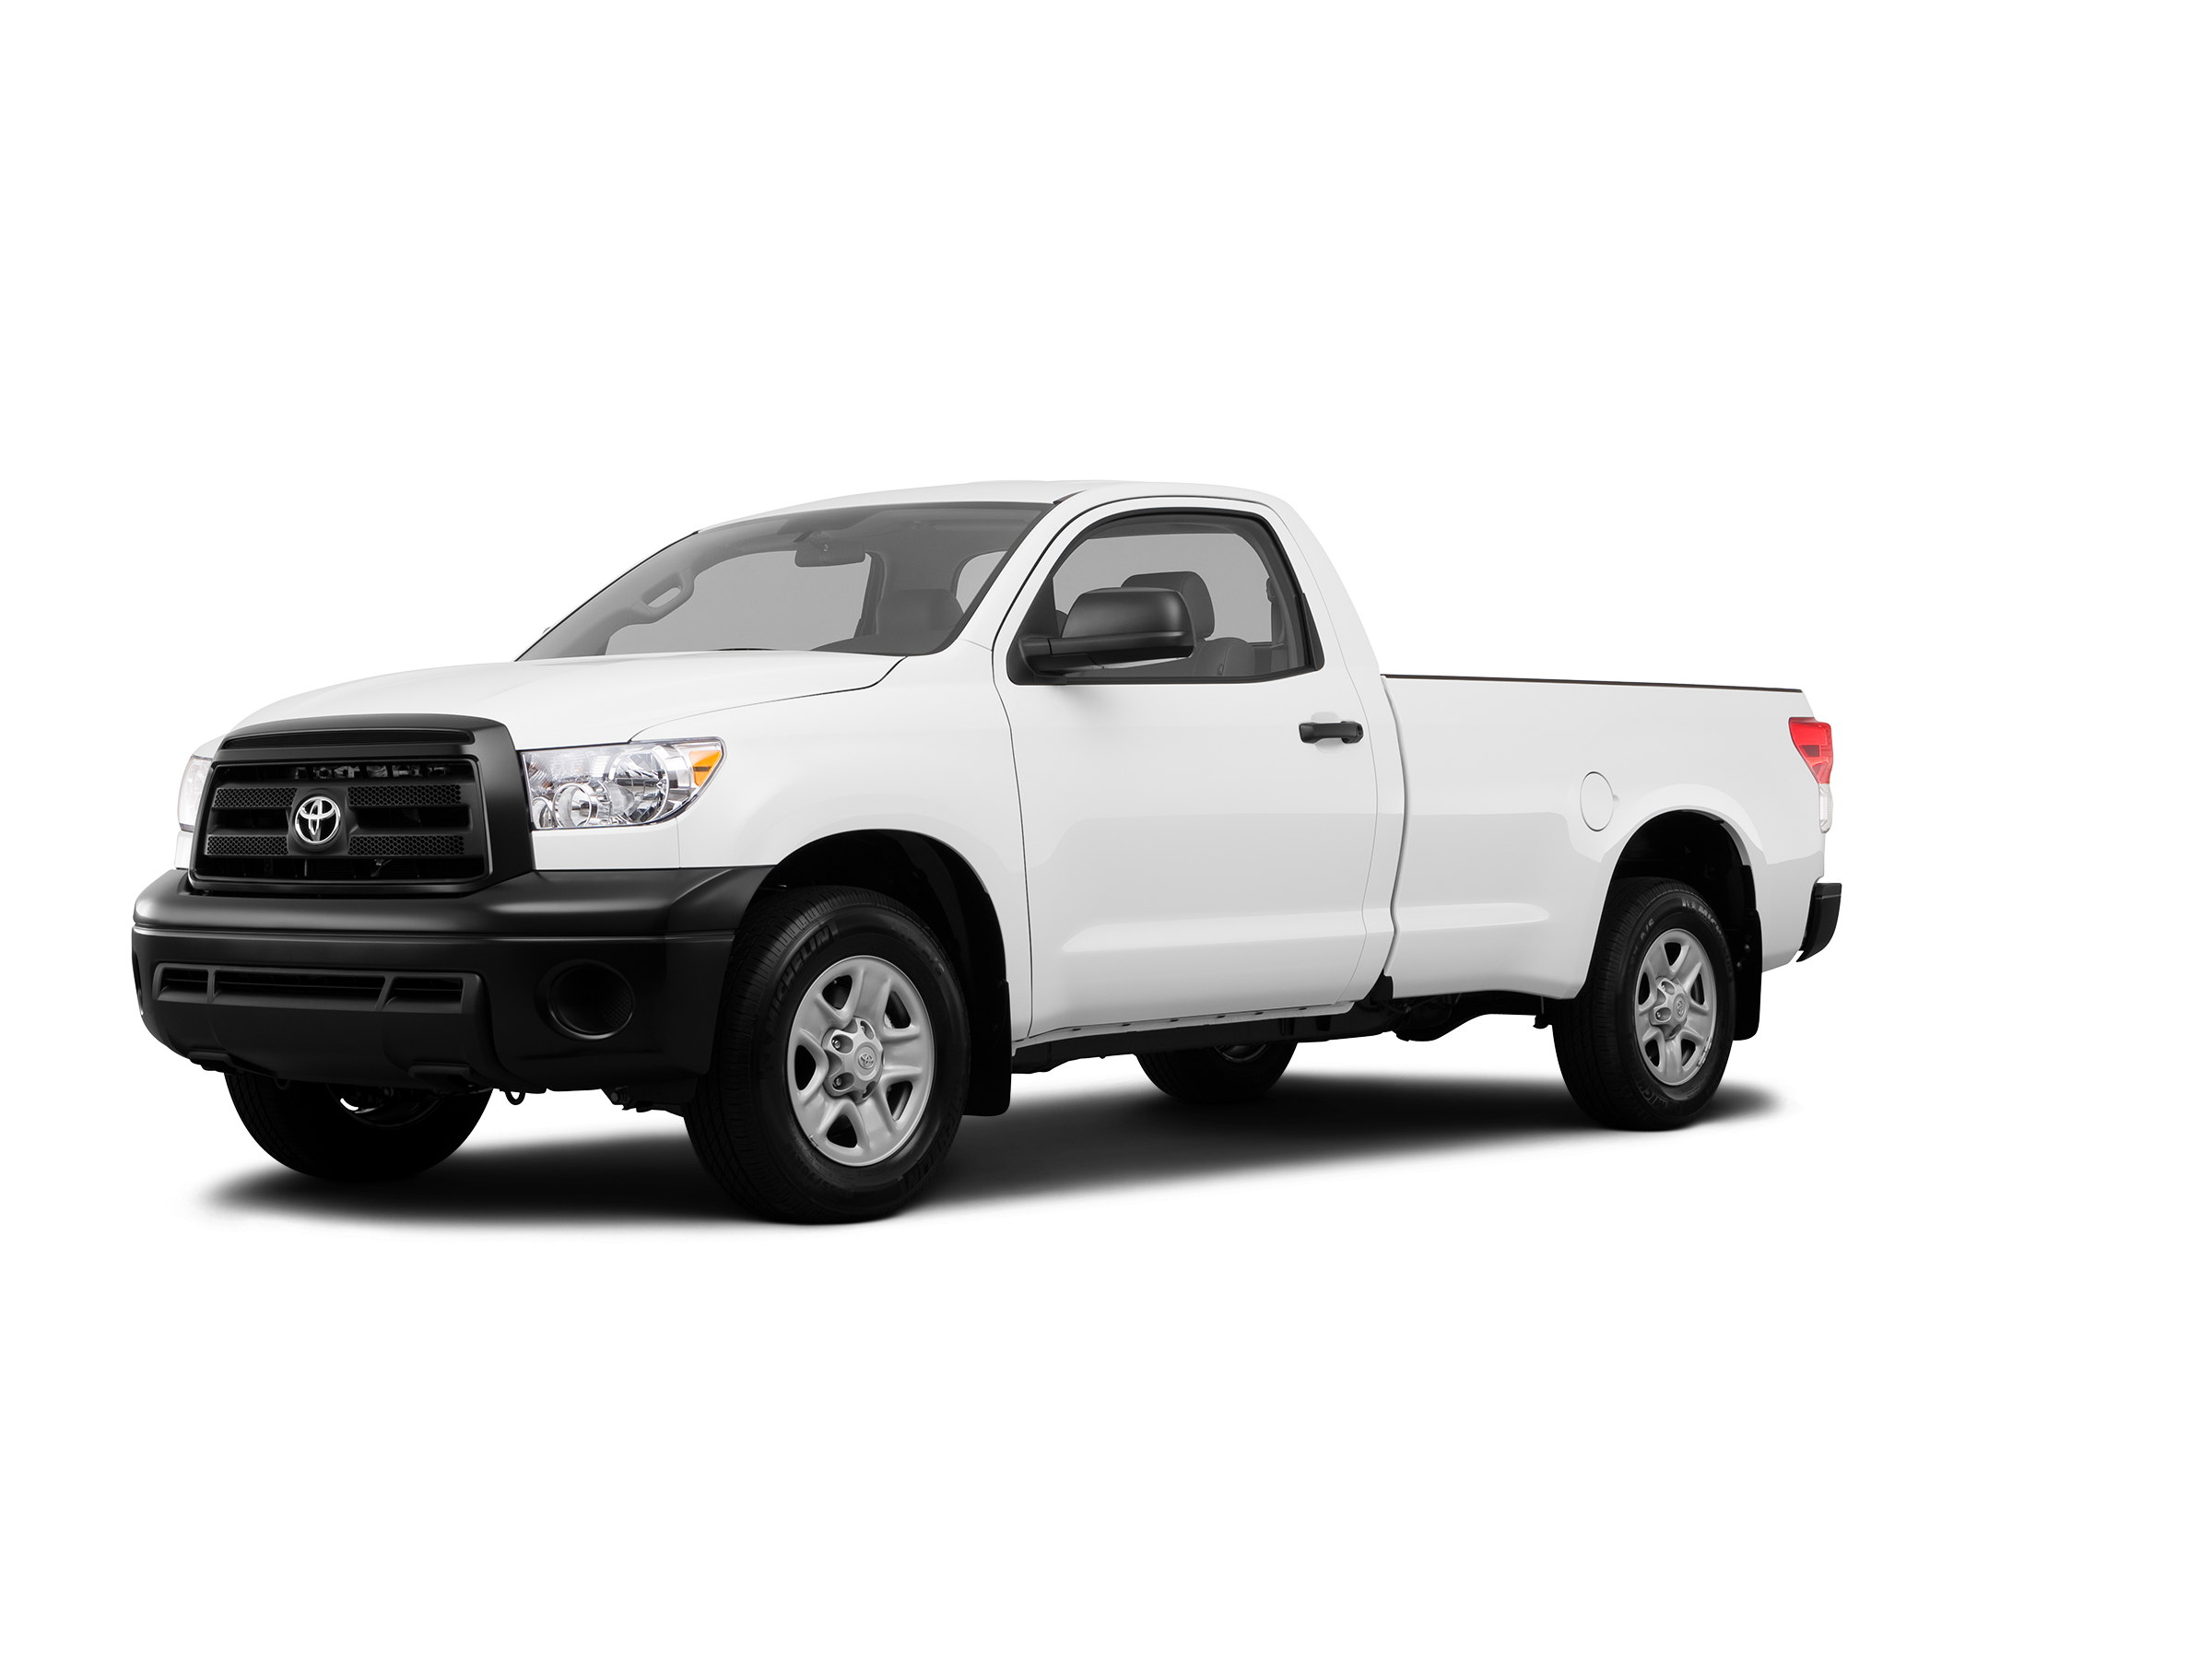 2013 Toyota Tundra Regular Cab Values And Cars For Sale Kelley Blue Book